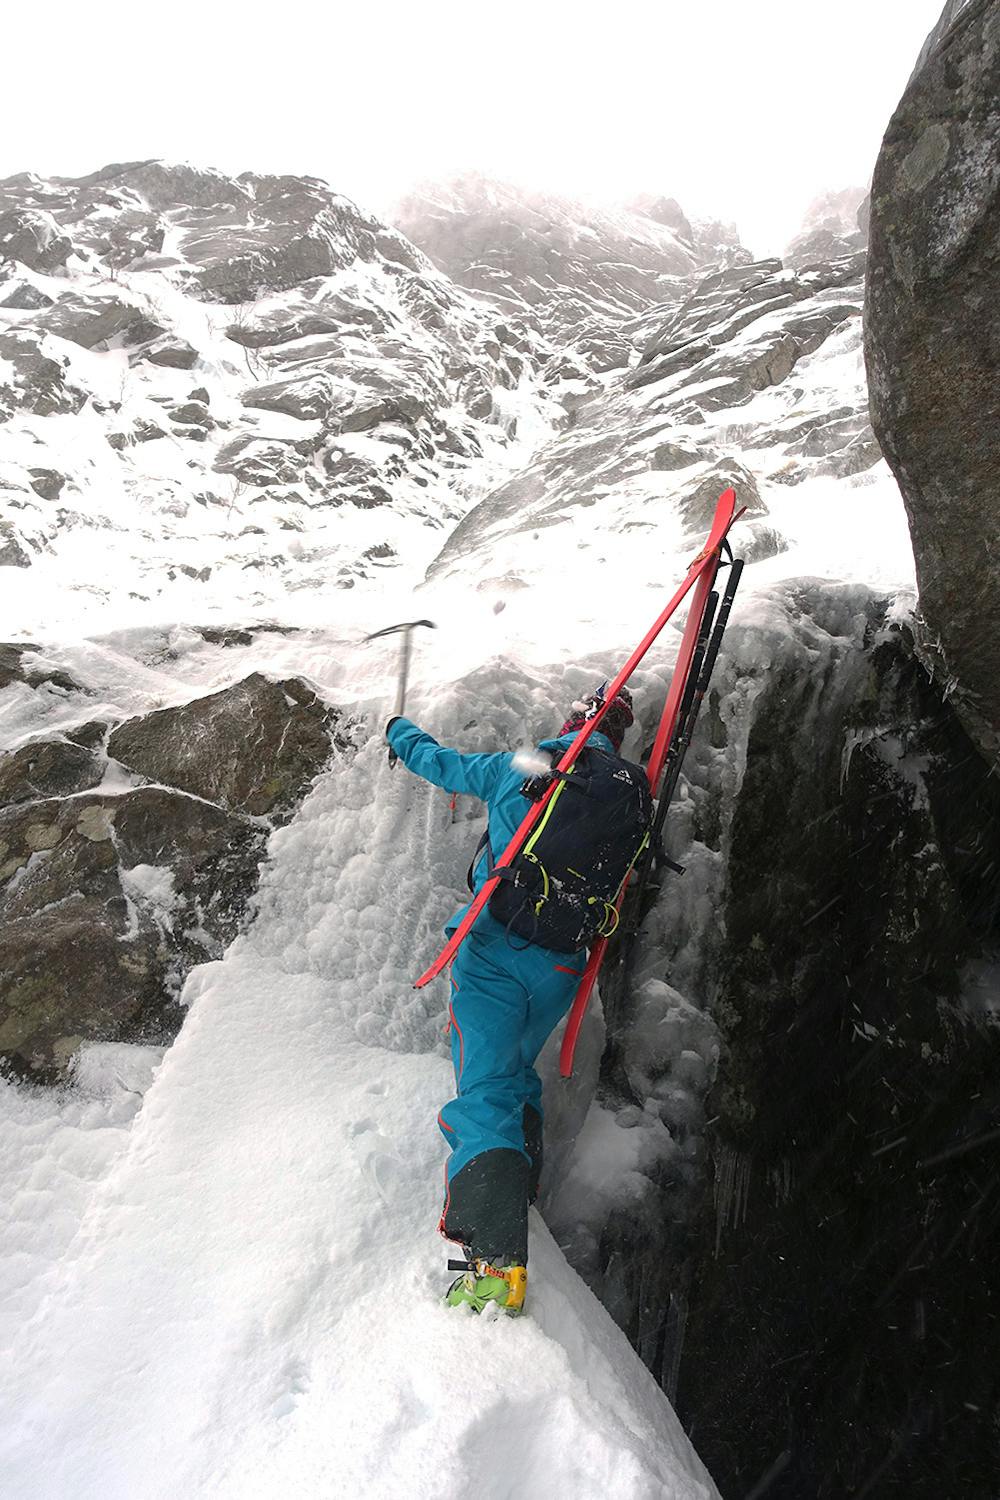 The mid way crux in the couloir can in some conditions require 2 axes and a rope